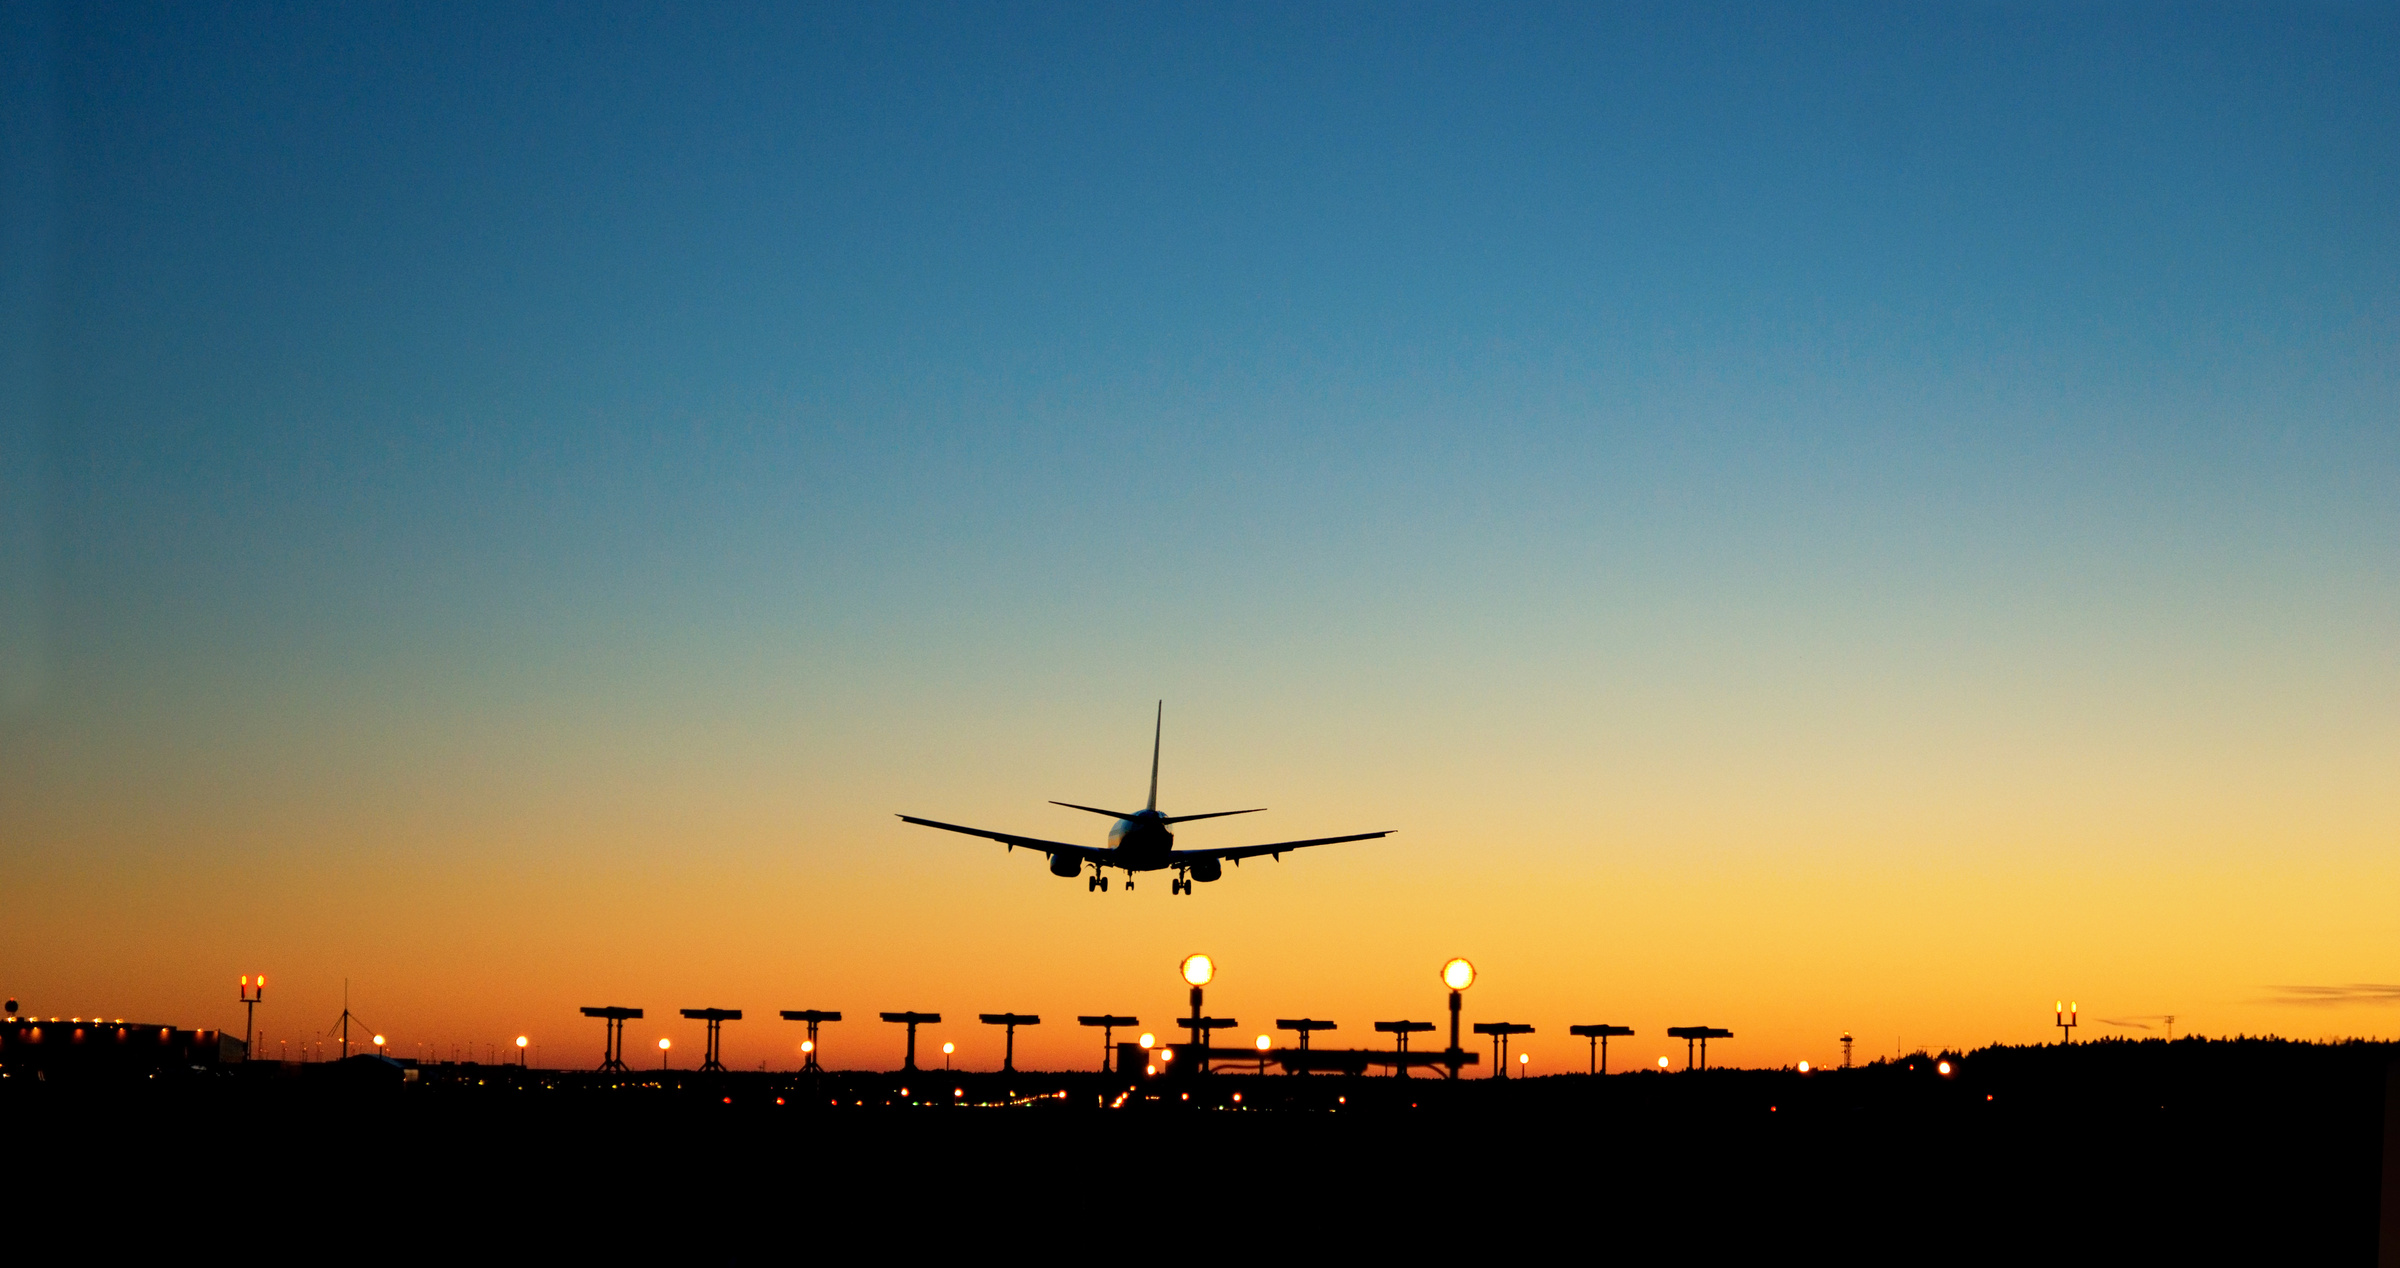 aircraft approaching airport at sunset